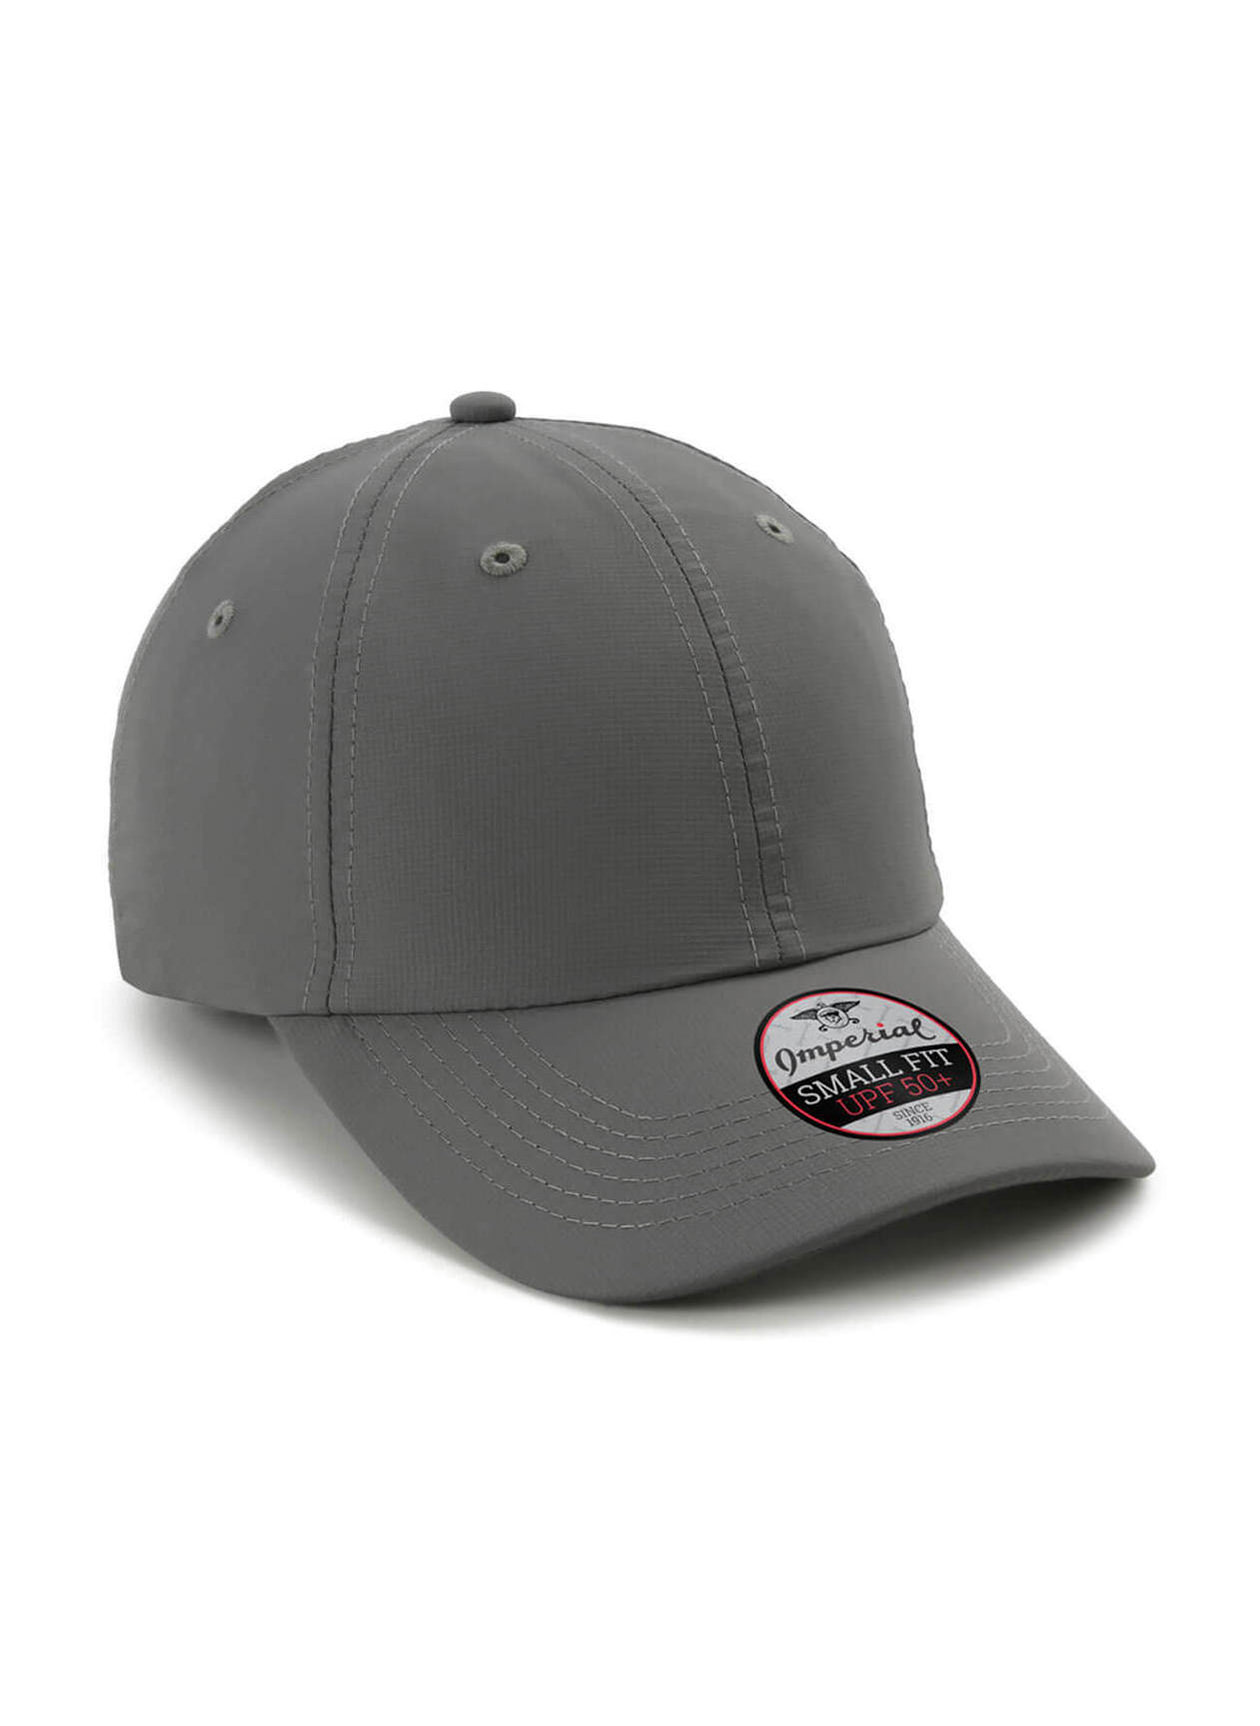 Imperial Frost Grey Original Small Fit Performance Hat